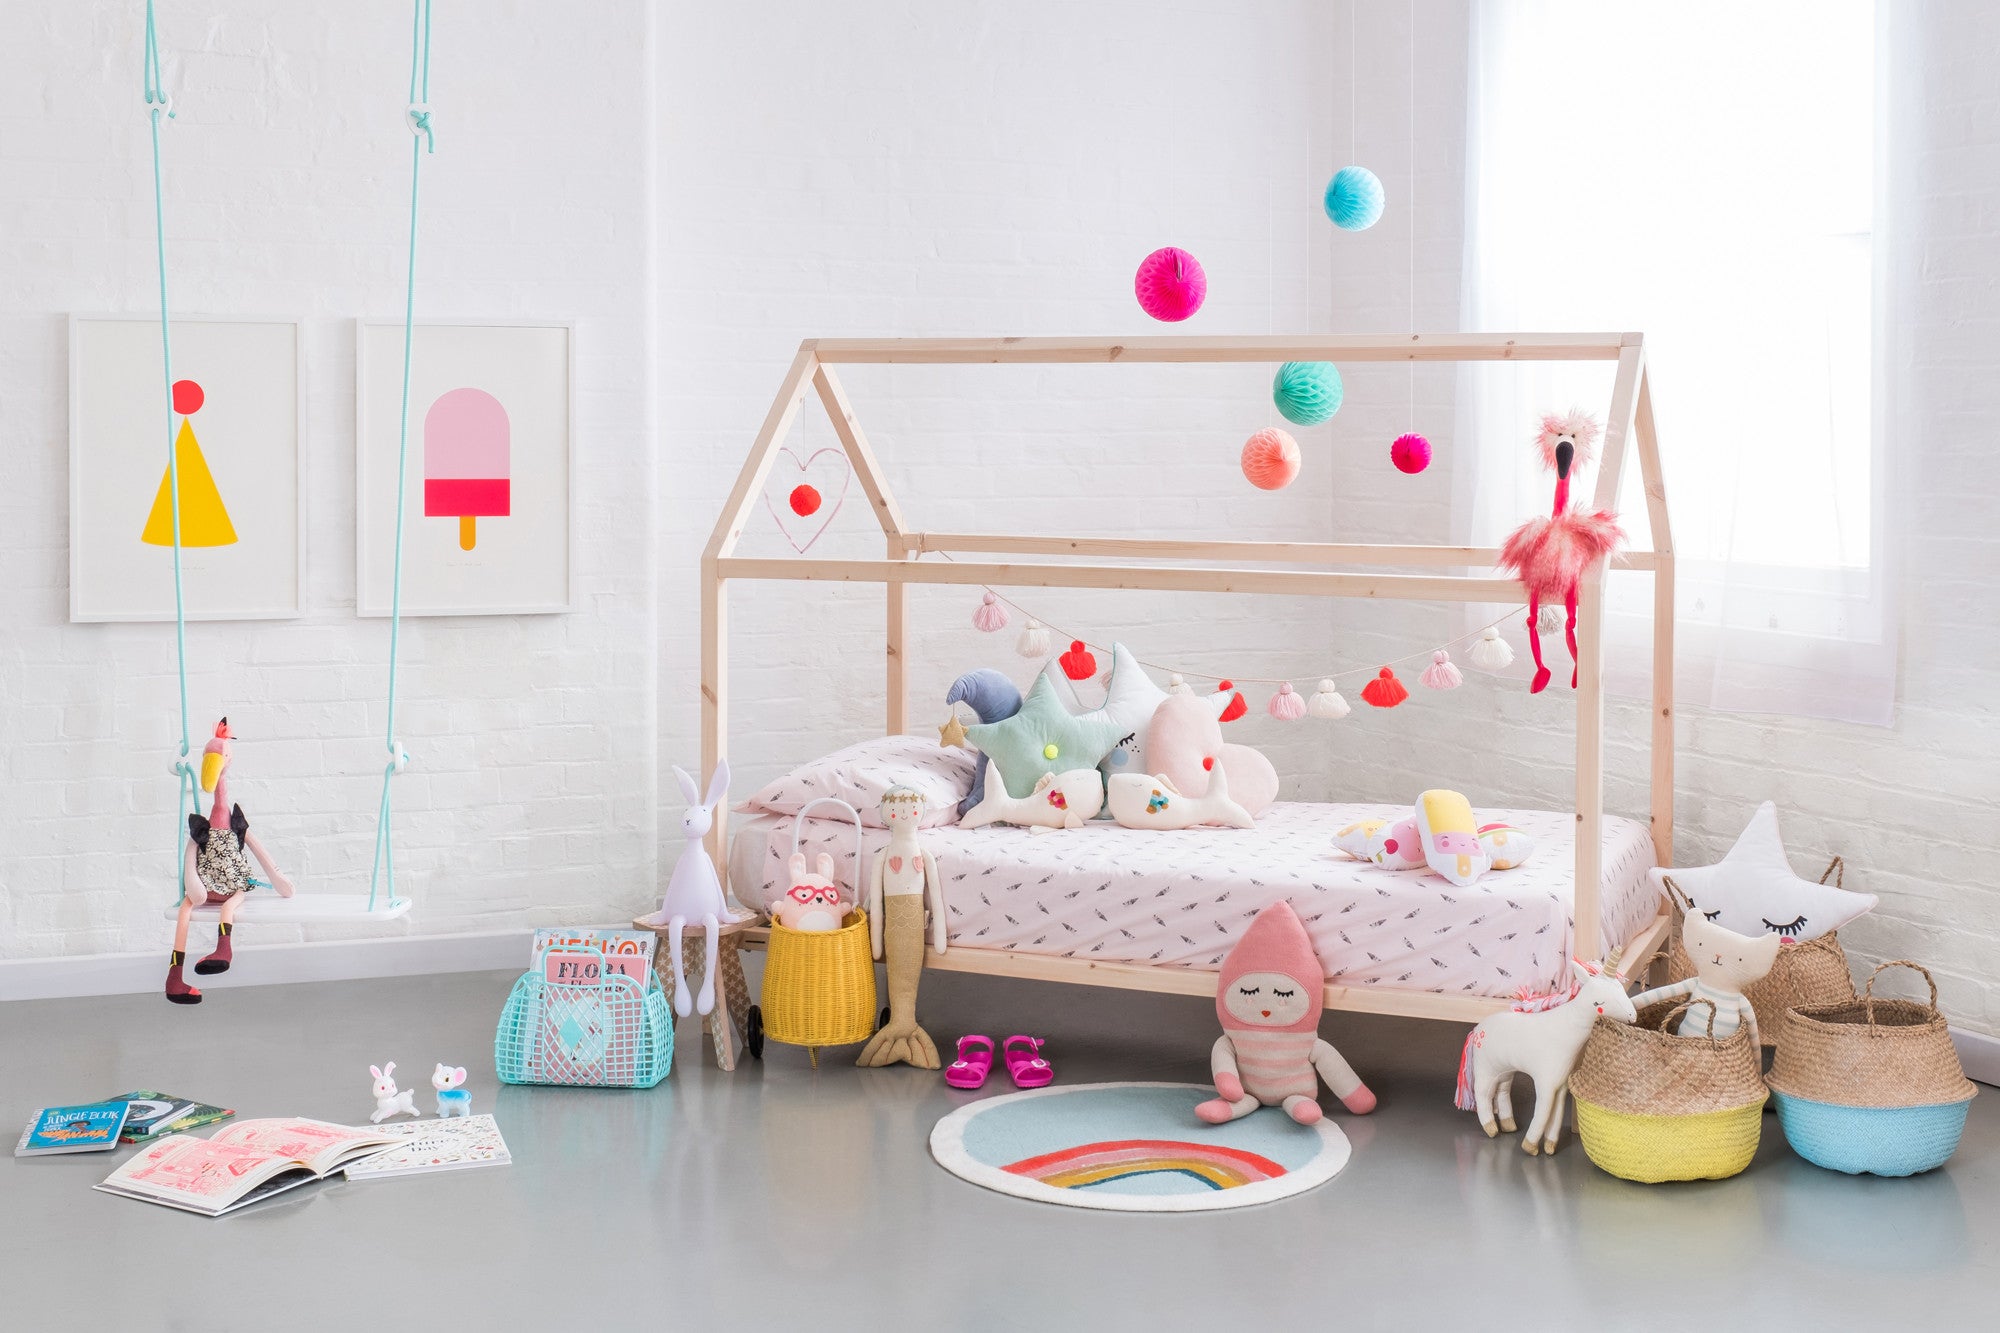 A Mermaid's Tale, children's bedroom styled by Bobby Rabbit.